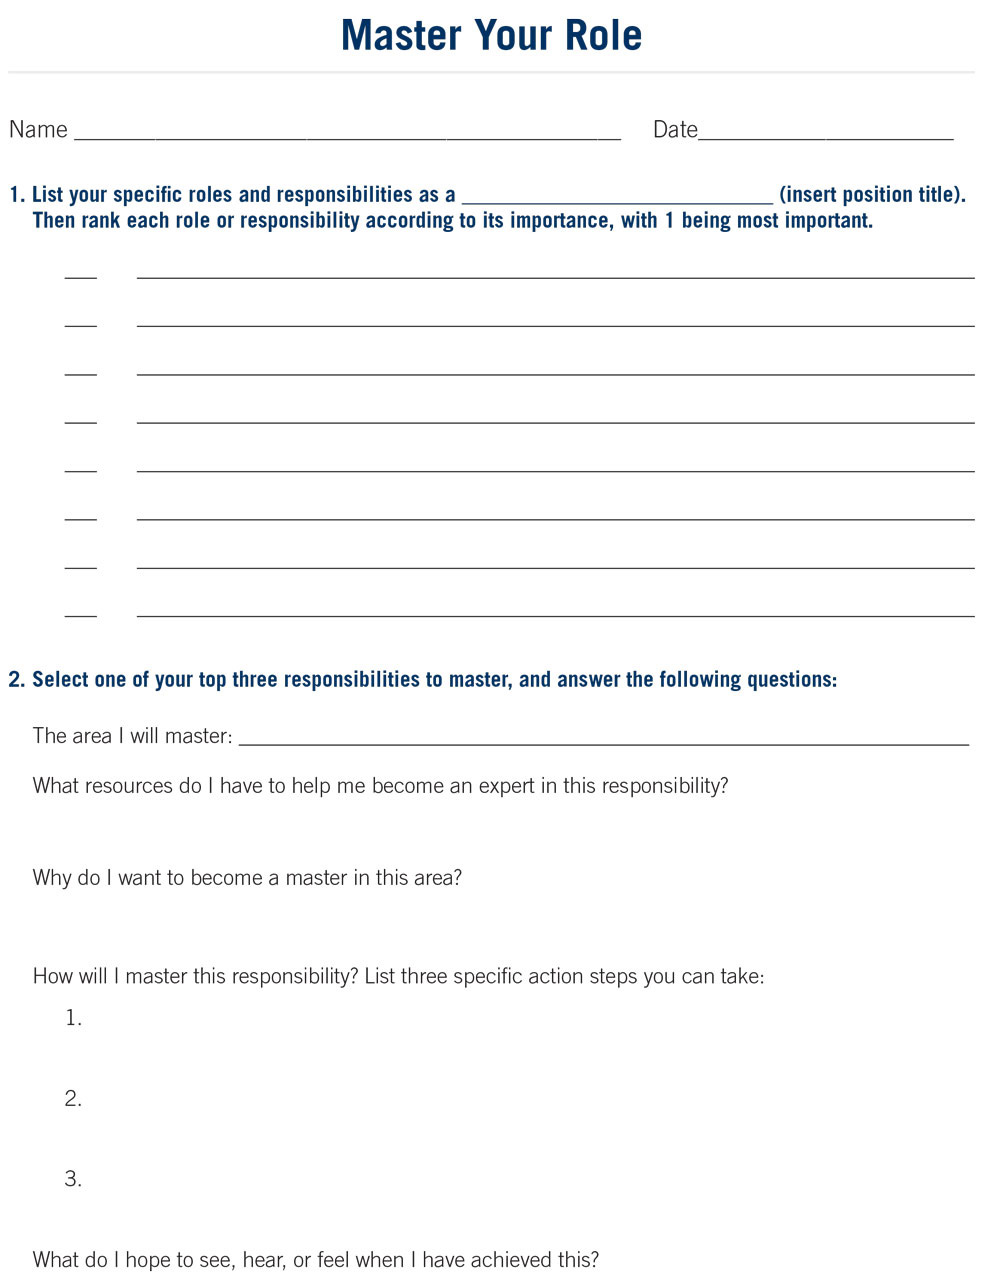 Master your role worksheet